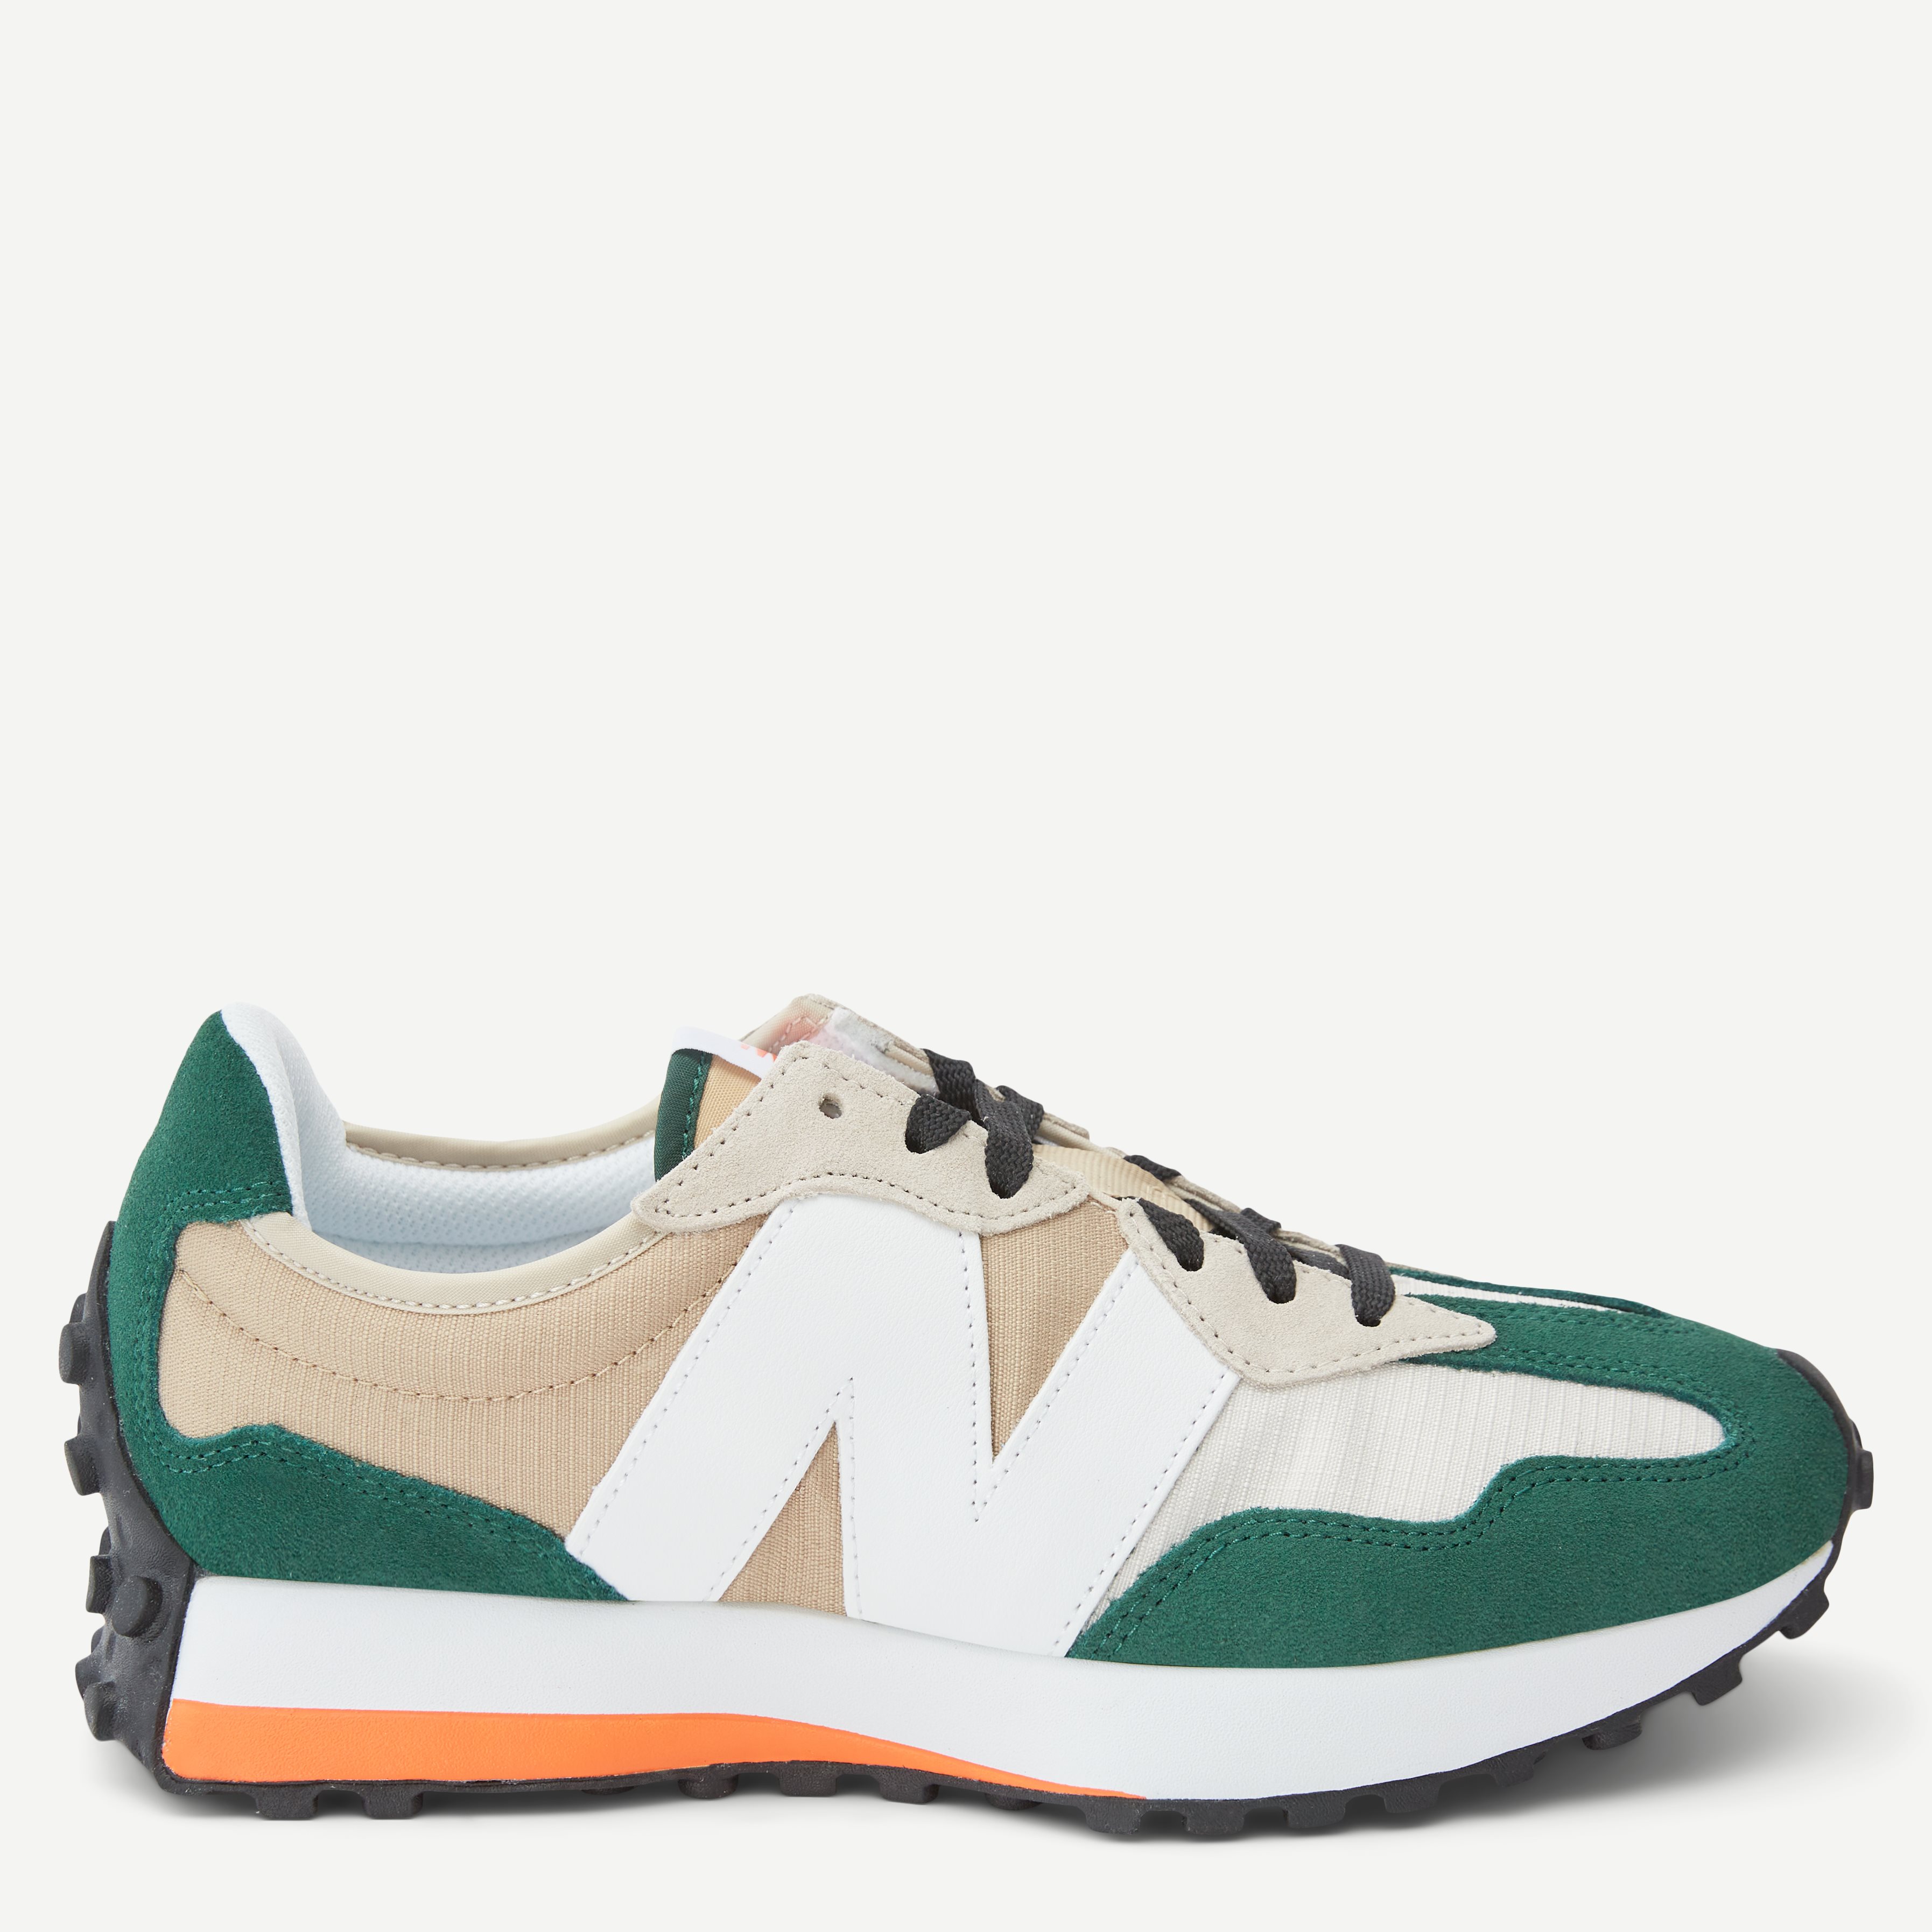 New Balance Shoes MS327 SP Green